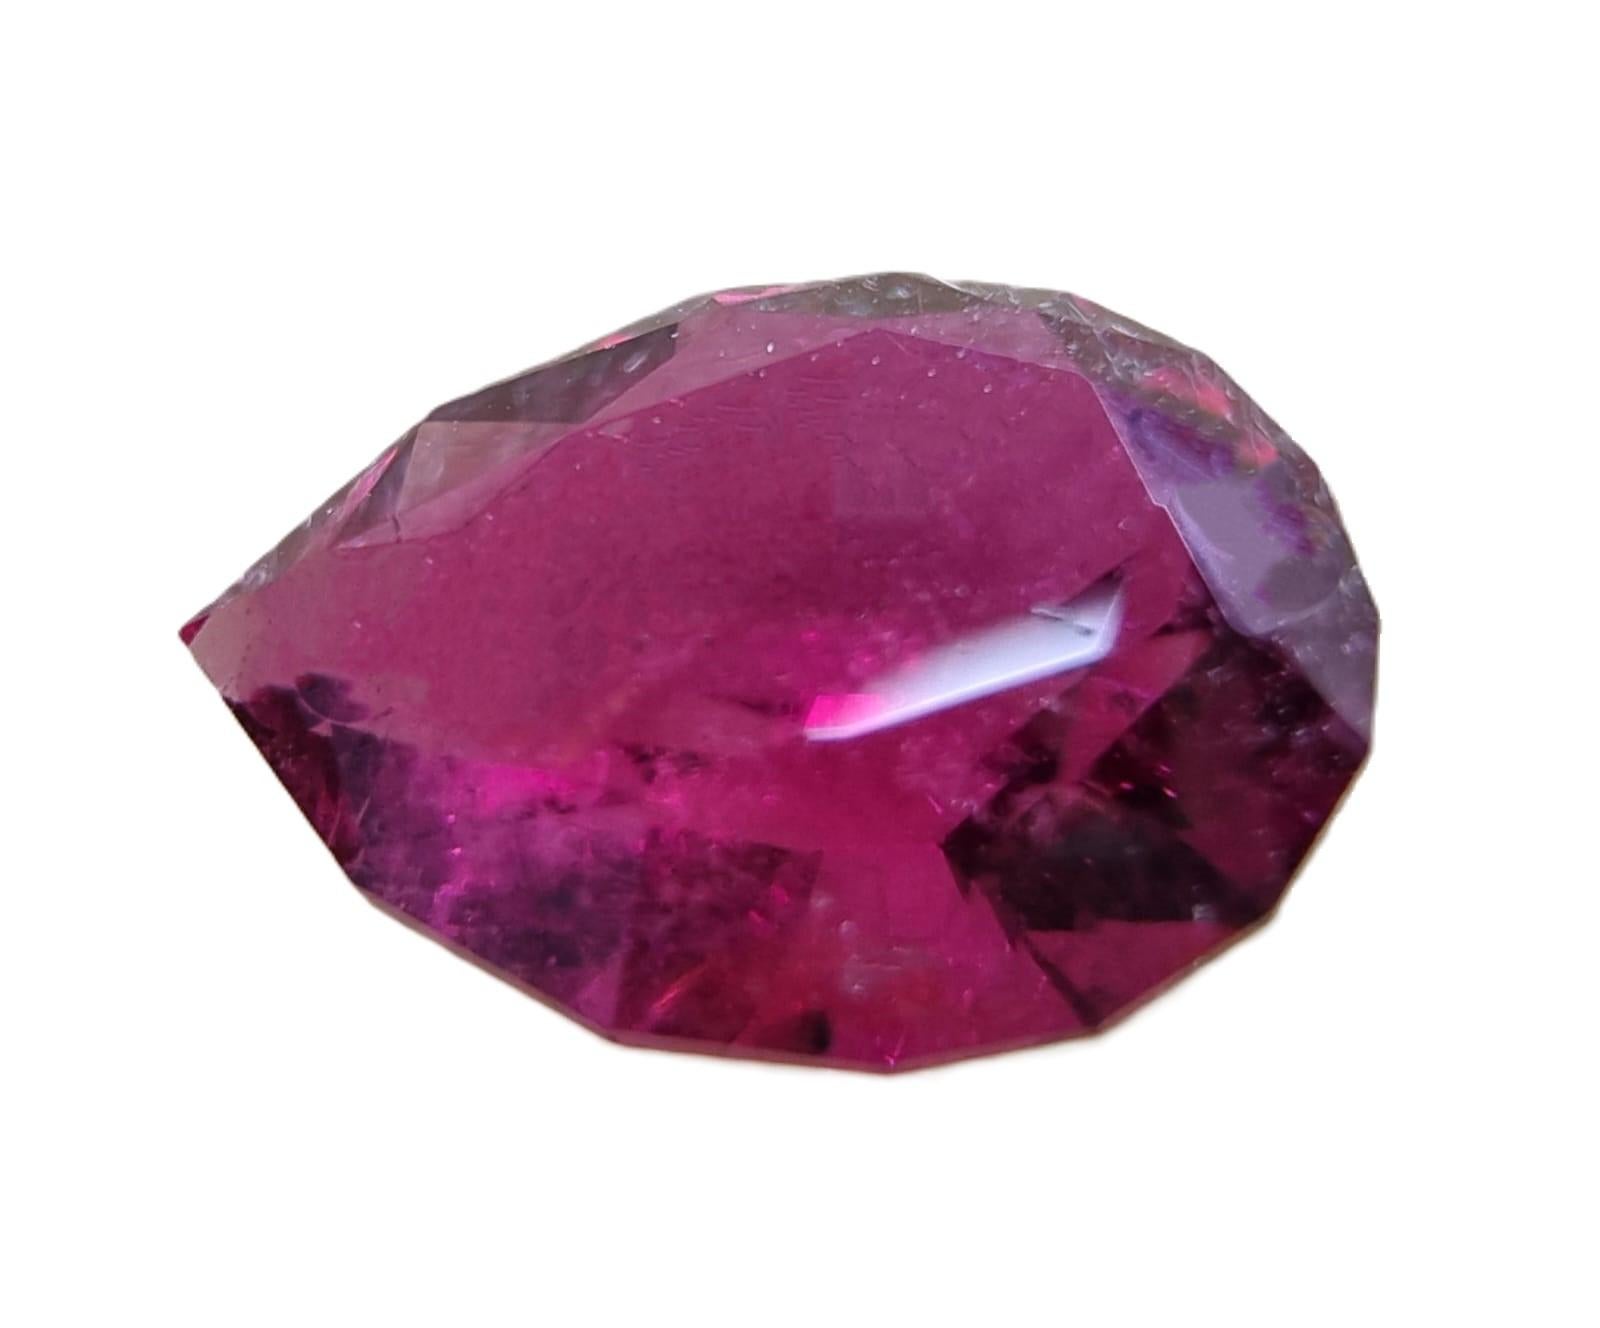 2.63ct Pear Cut Pinkish Red Rubellite Tourmaline Gemstone  In New Condition For Sale In Sheridan, WY